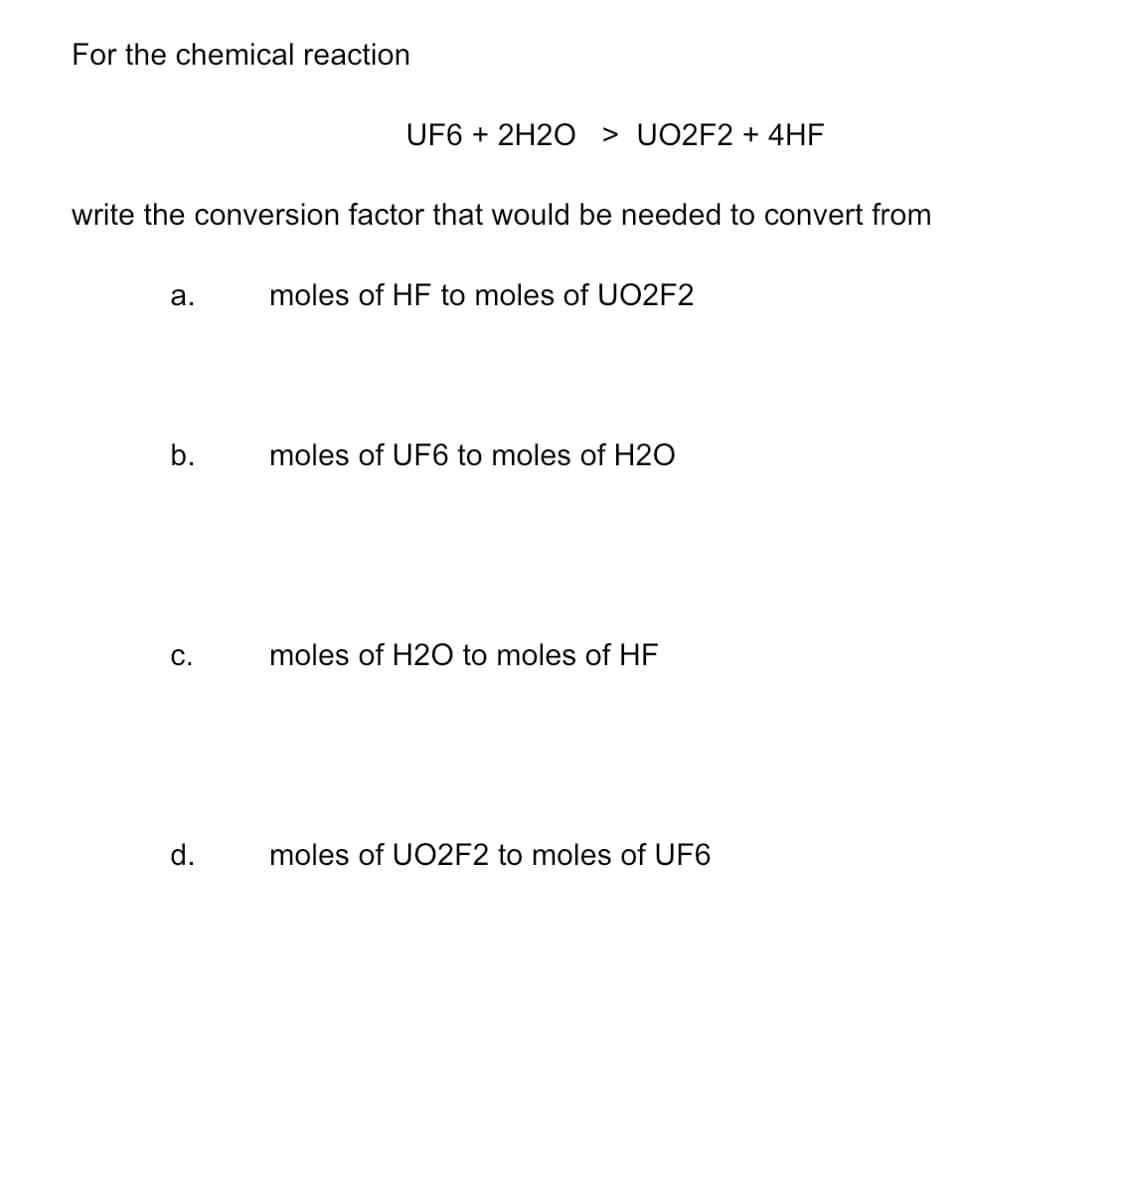 For the chemical reaction
UF6 + 2H2O > UO2F2 + 4HF
write the conversion factor that would be needed to convert from
а.
moles of HF to moles of UO2F2
b.
moles of UF6 to moles of H2O
C.
moles of H2O to moles of HF
d.
moles of UO2F2 to moles of UF6
